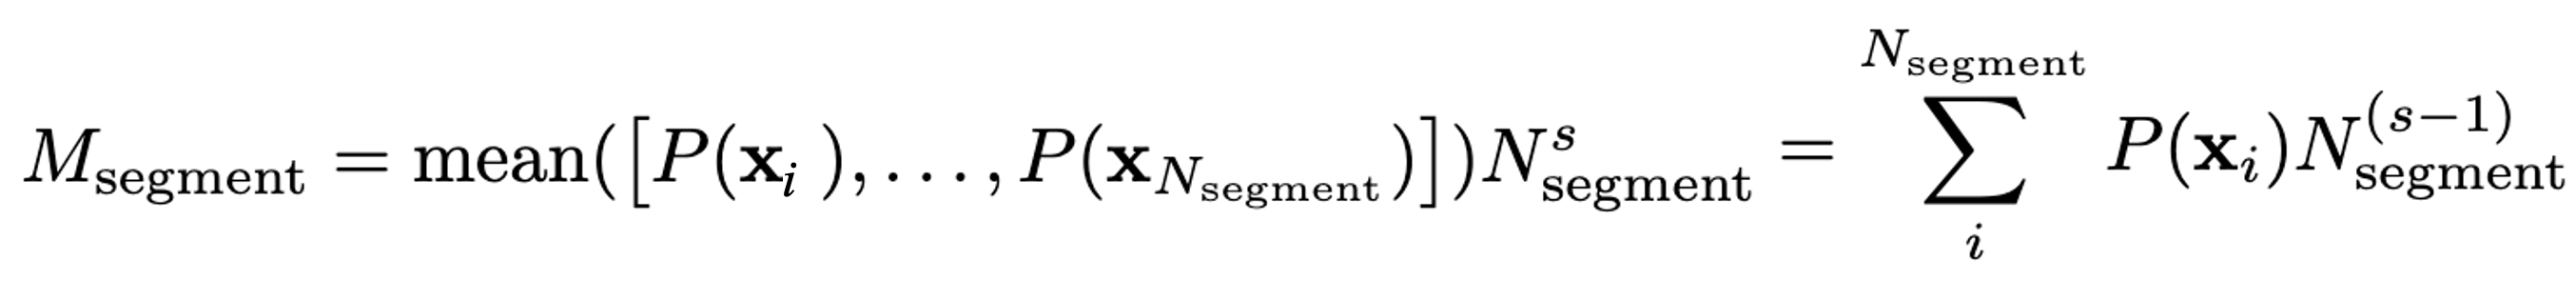 calculate aggregation of simple mean